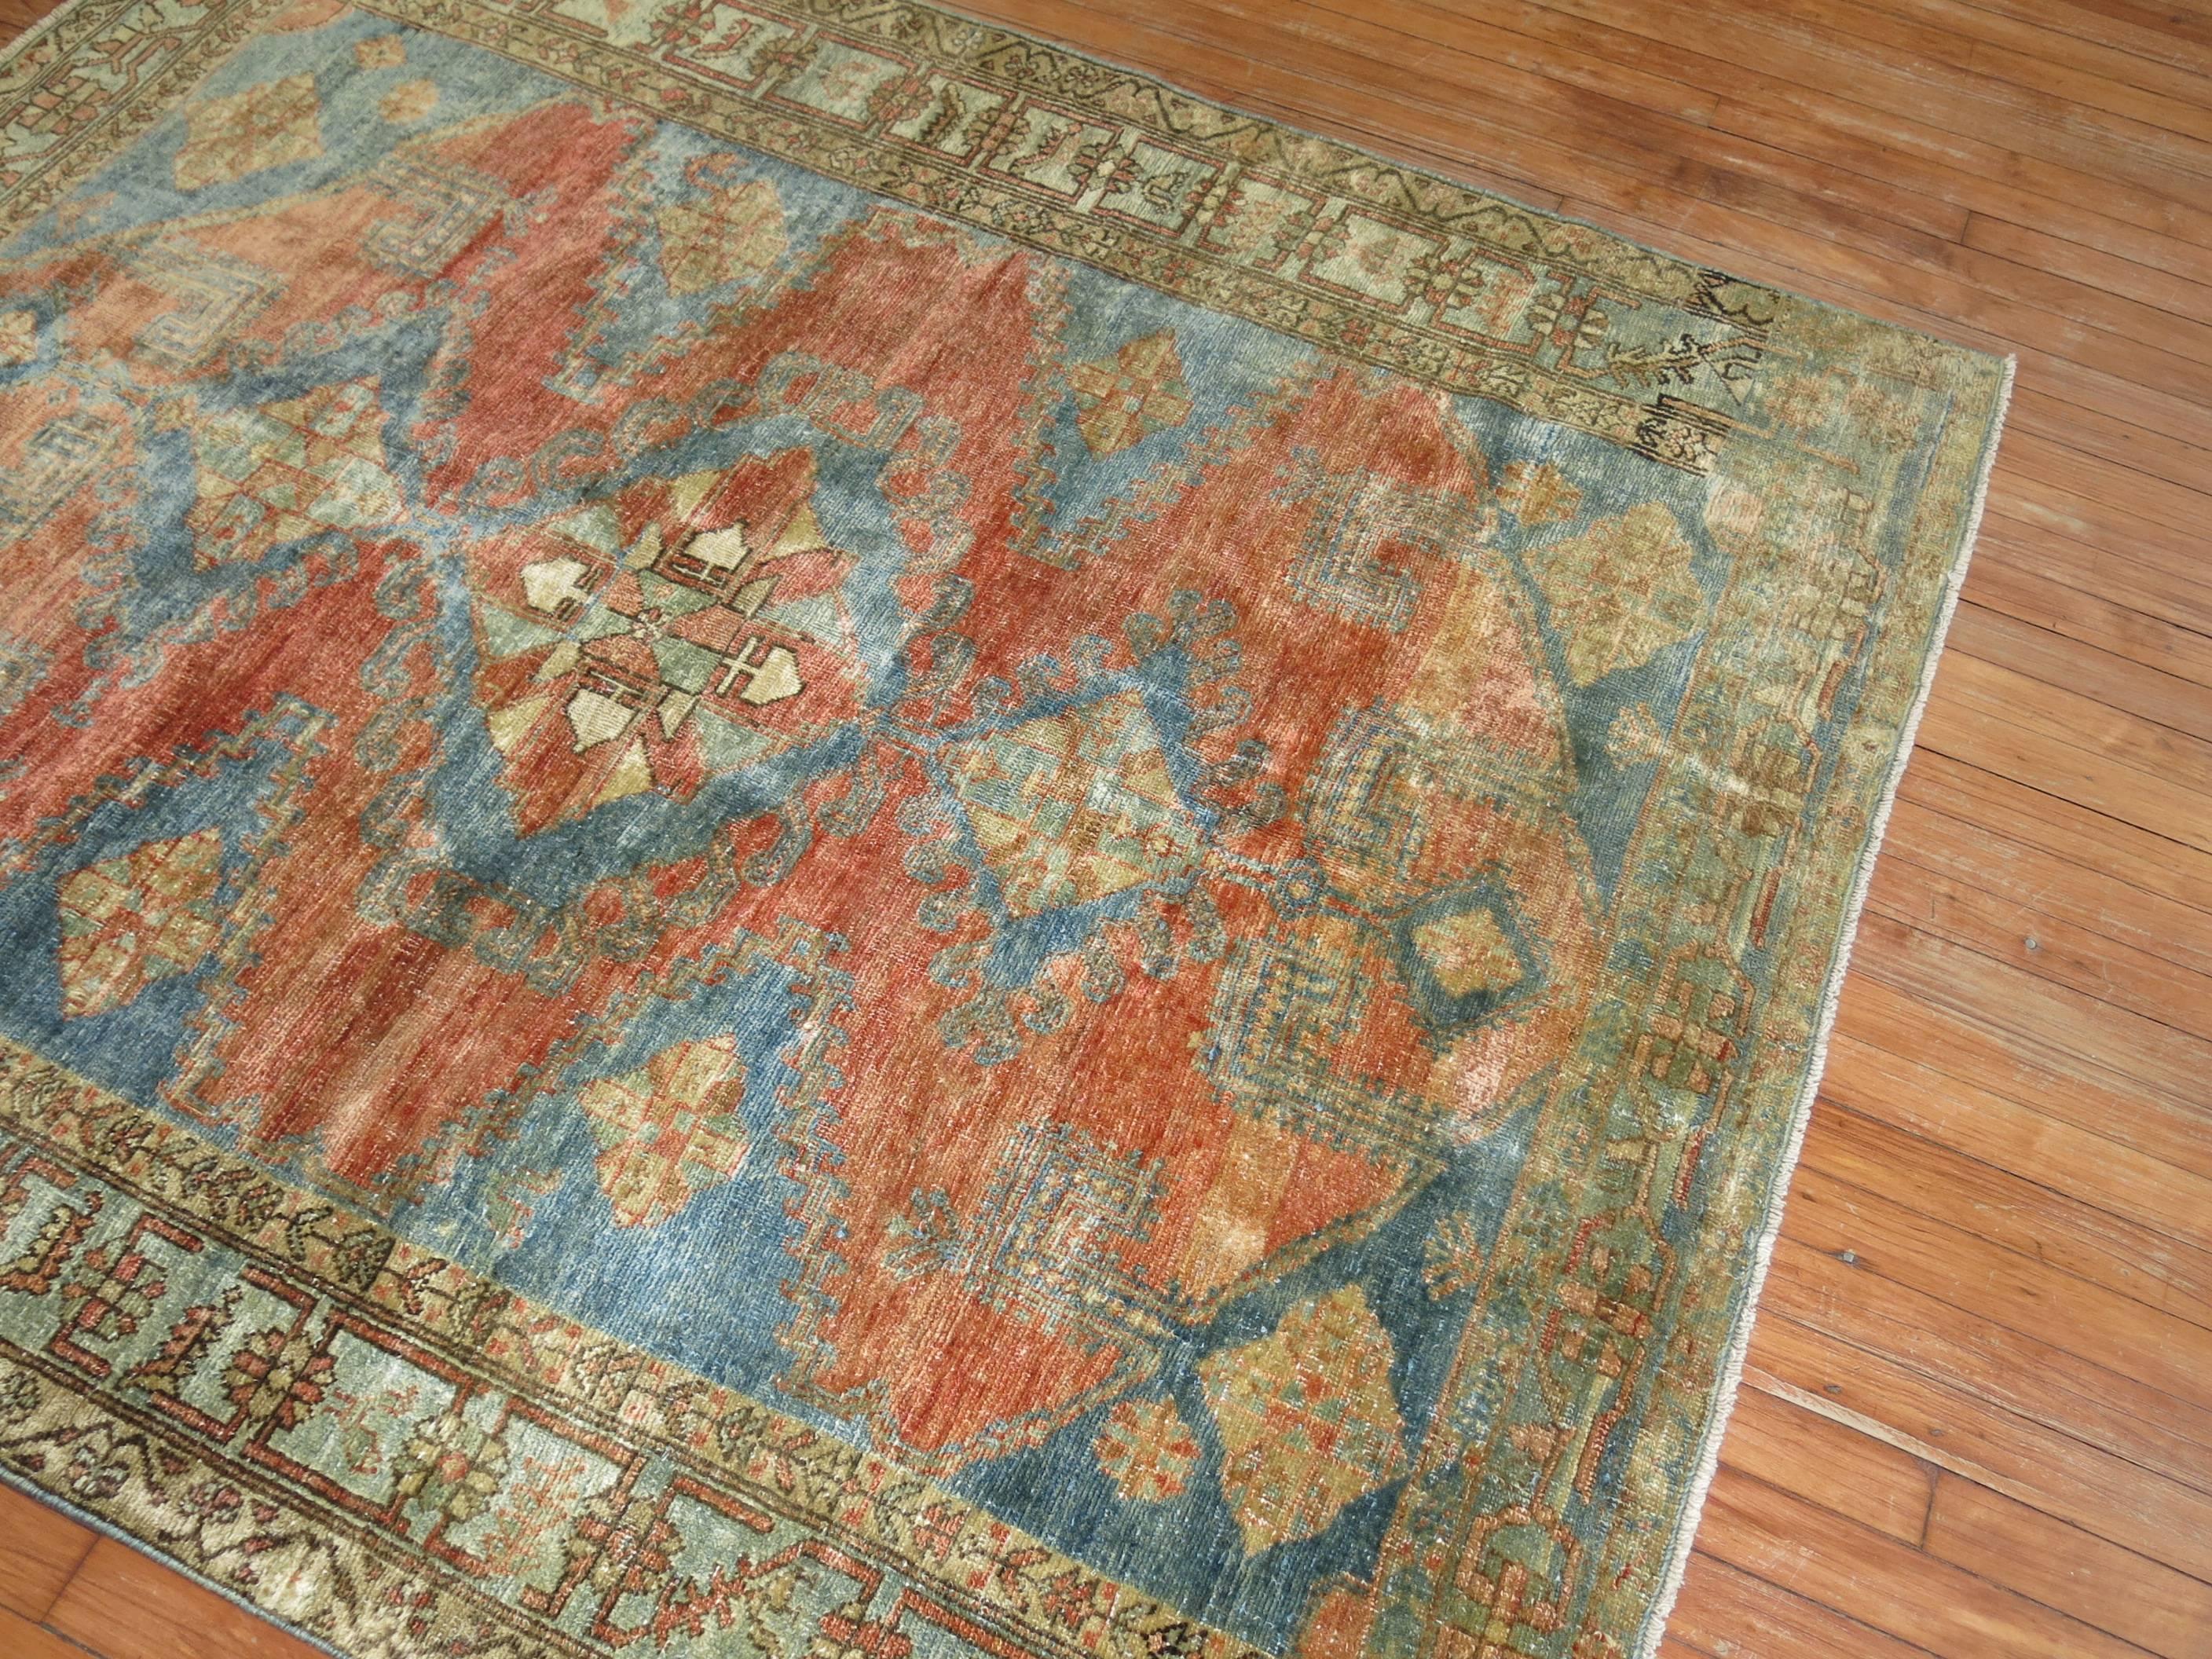 Spanish Colonial Antique Persian Malayer Square Rug